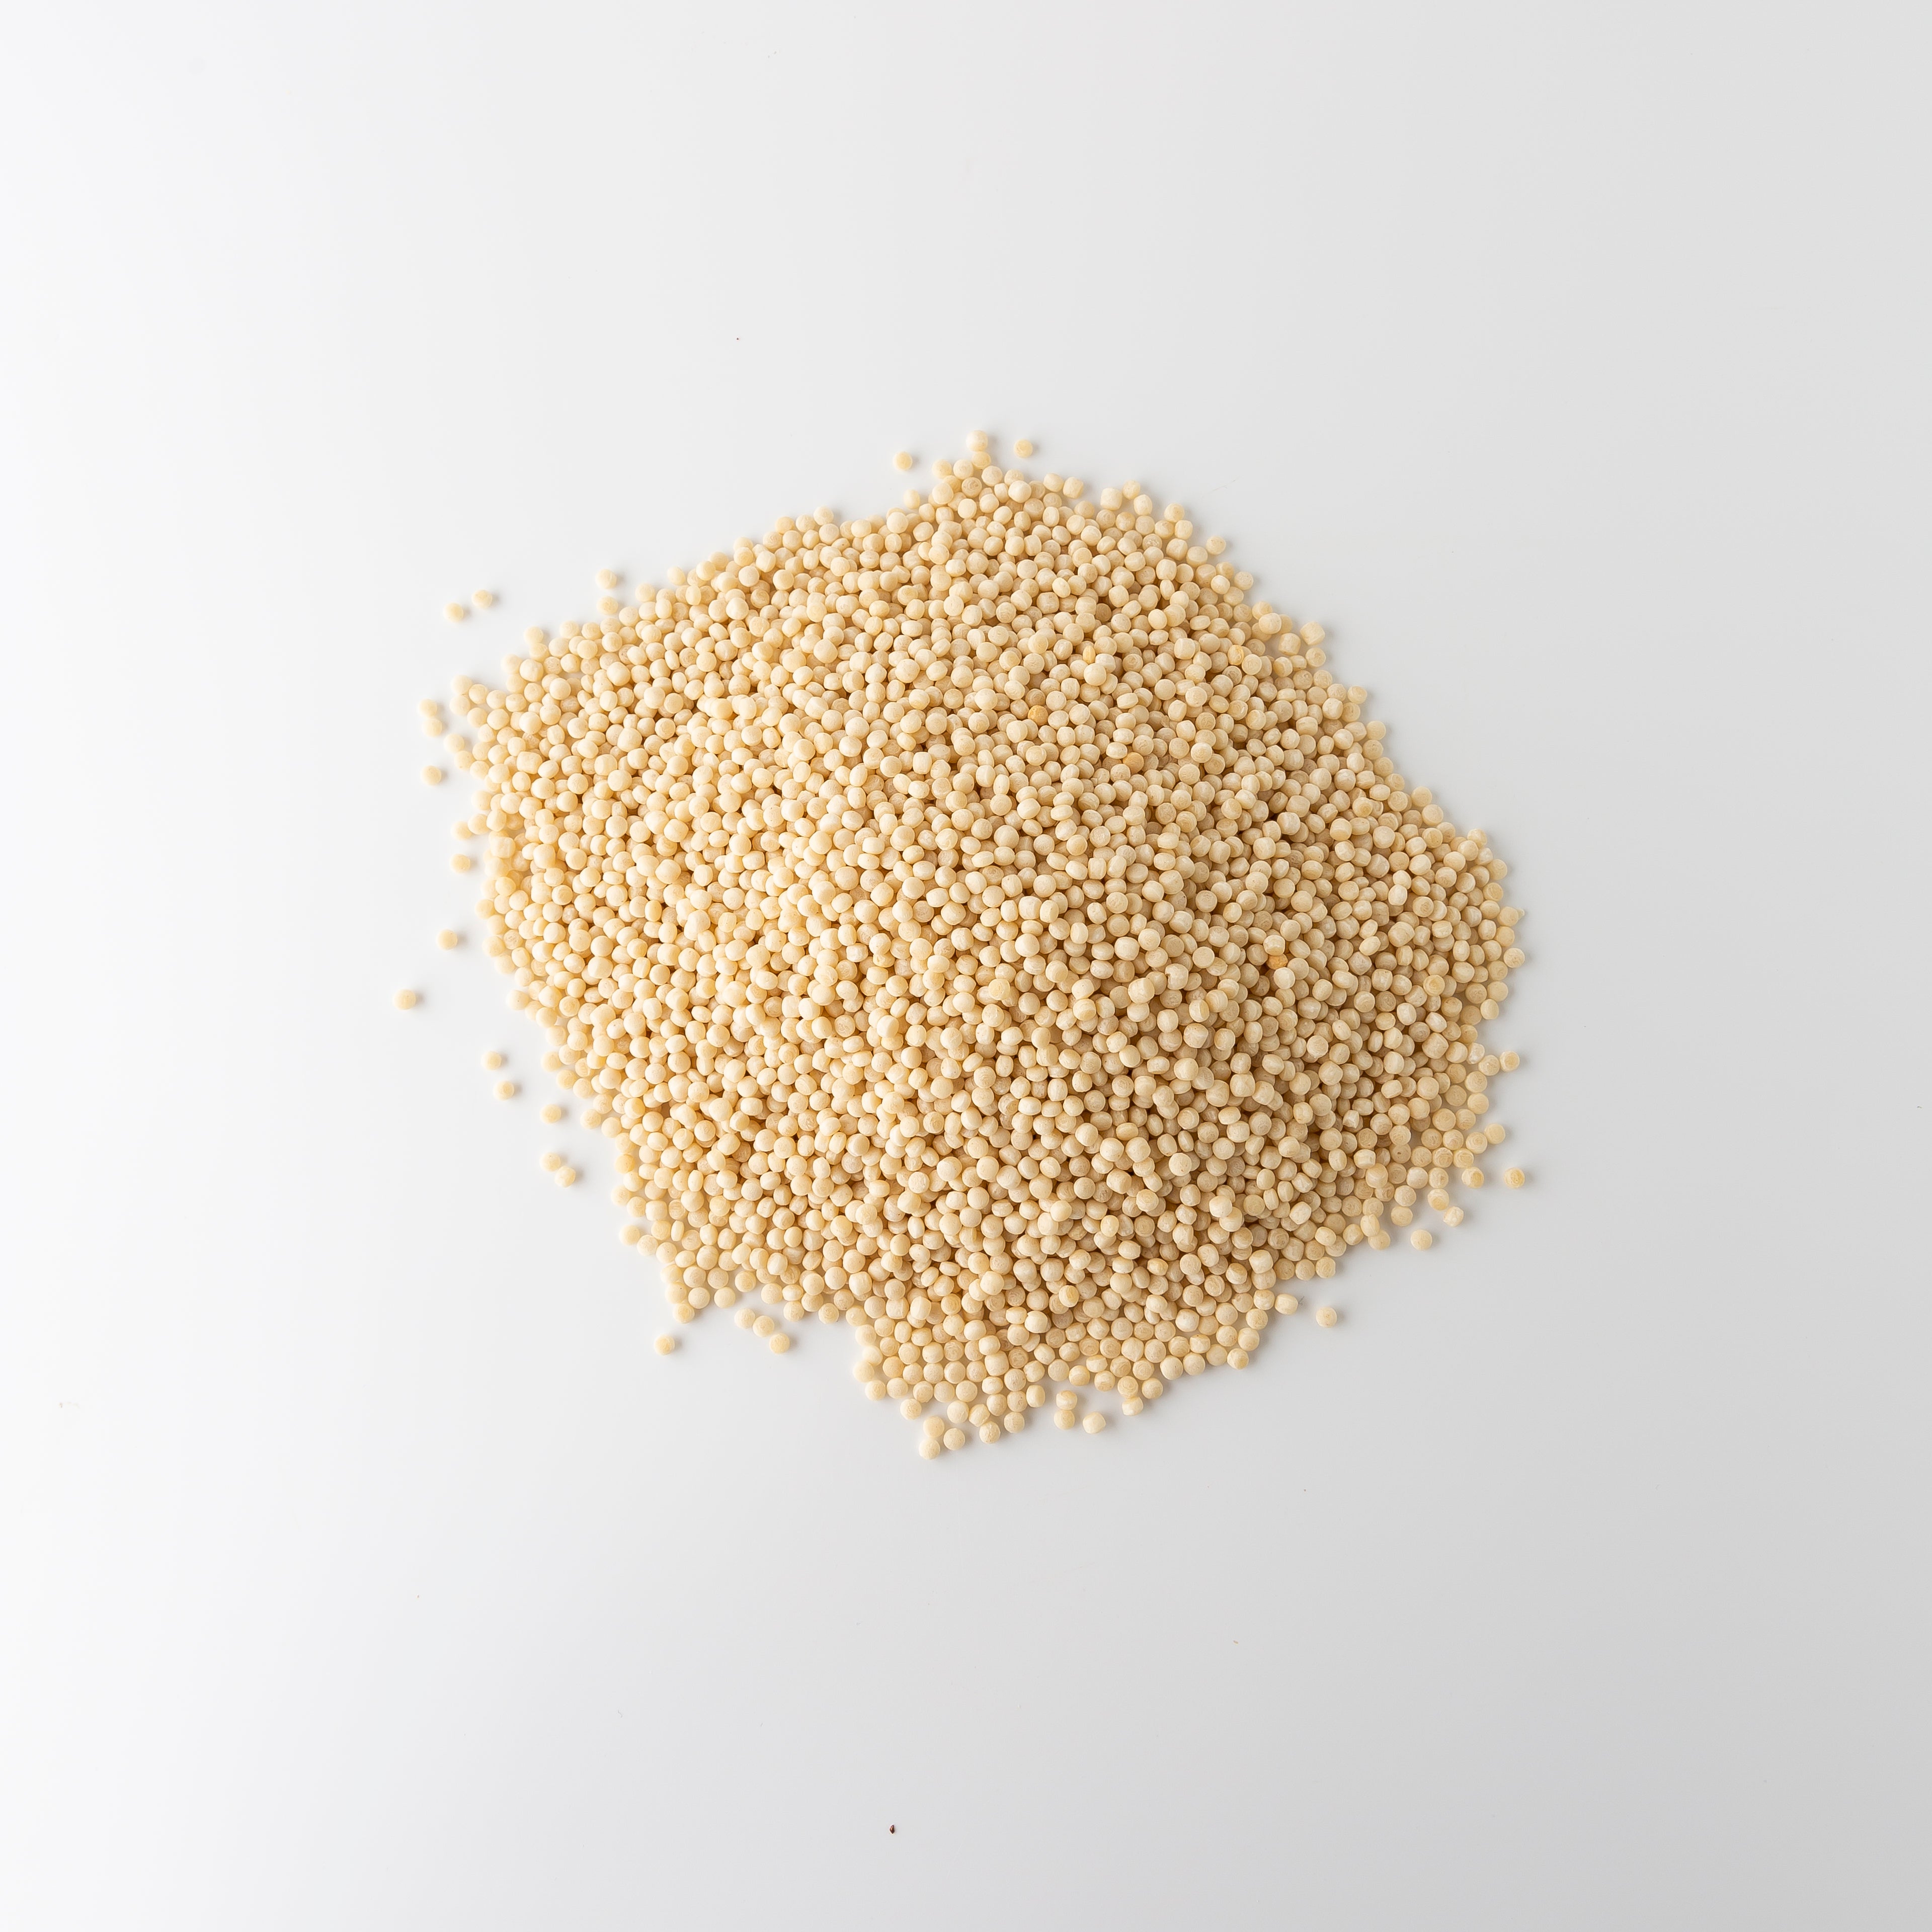 Pearl Cous Cous (Cereals) Image 3 - Naked Foods